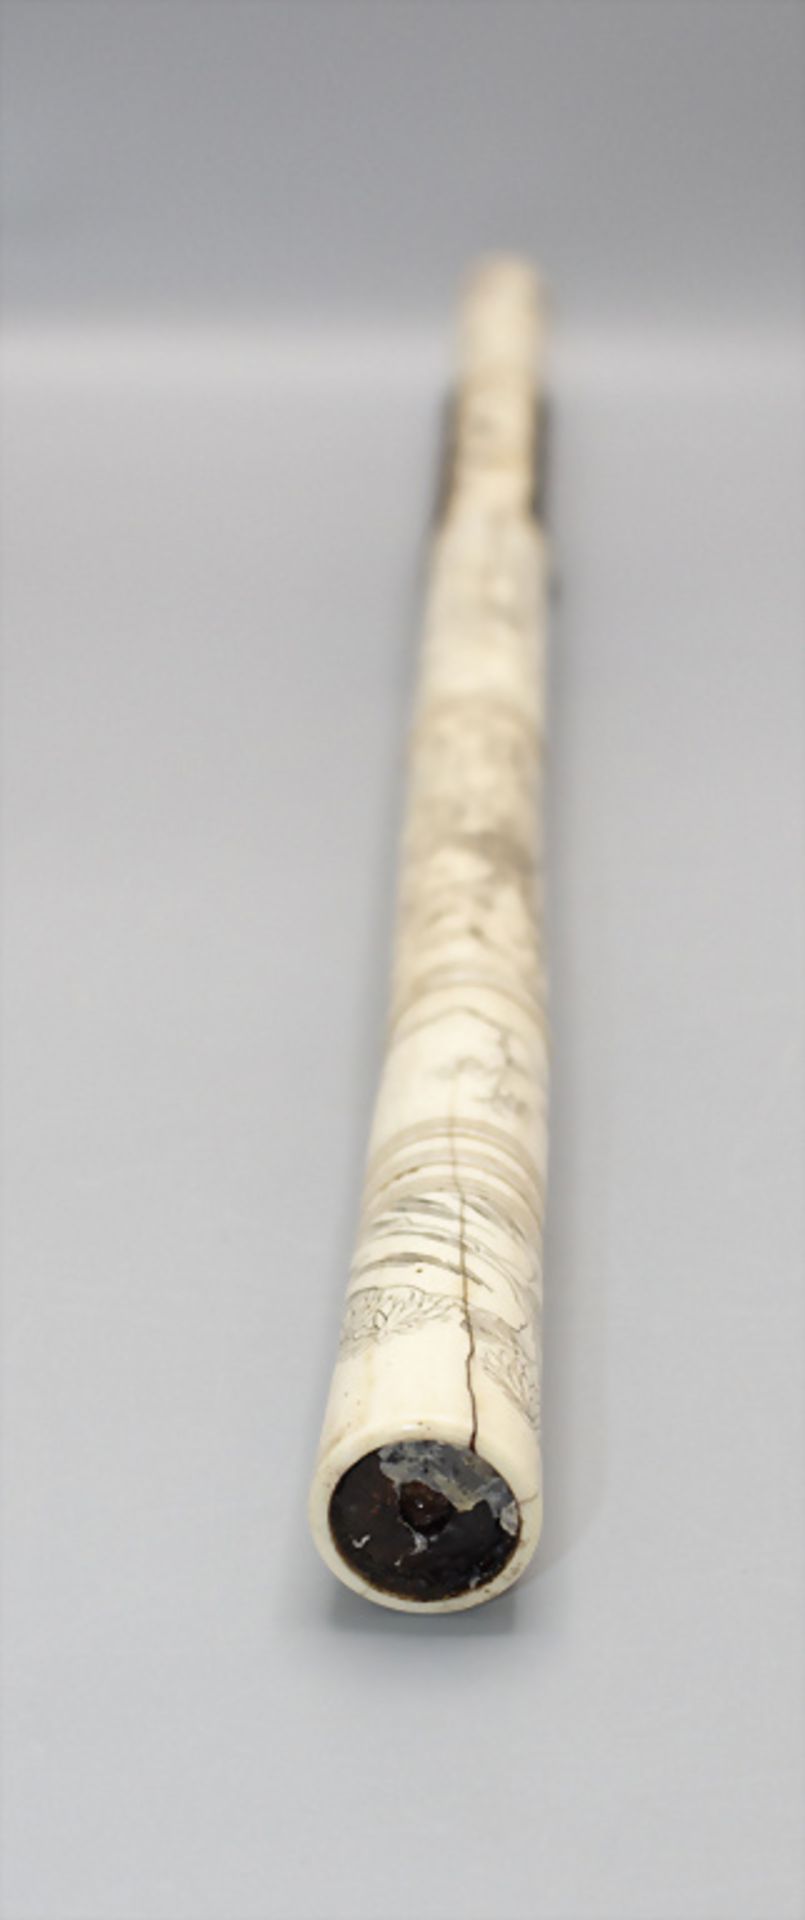 Opiumpfeife / An opium pipe, China, wohl 19. Jh. - Image 5 of 5